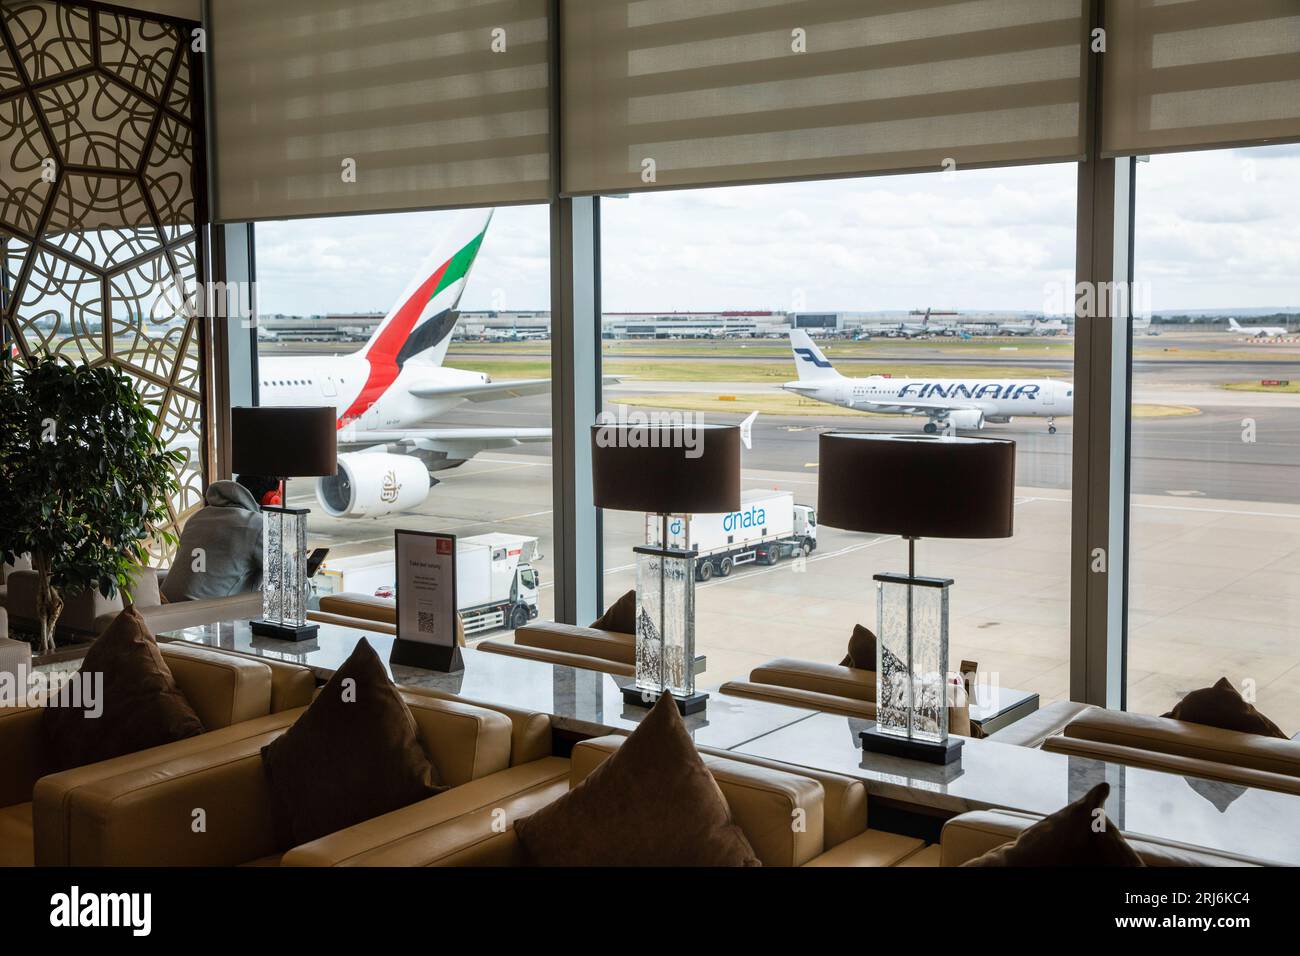 Lhr004 UK, England, London Heathrow Airport, Emirates Business Class Lounge, overlooking A380 at gate Stock Photo